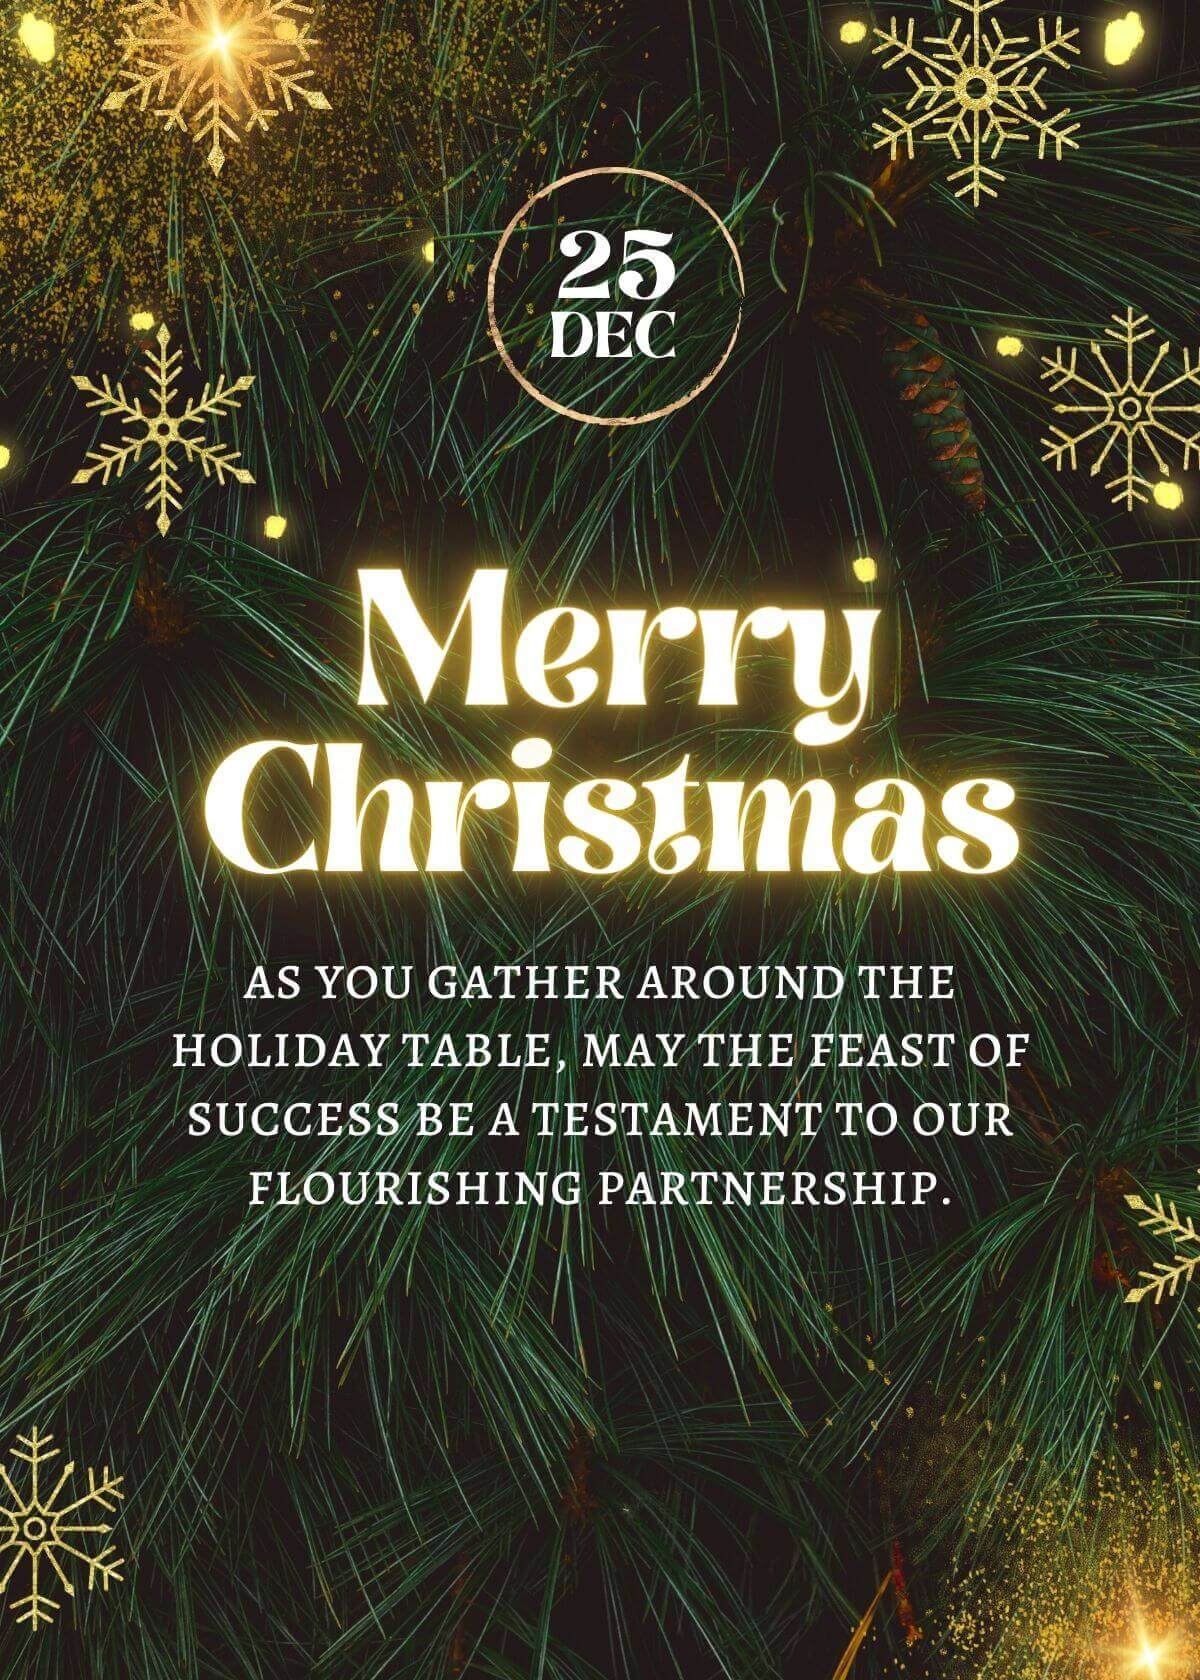 Merry Christmas Message For Business Partner With Image